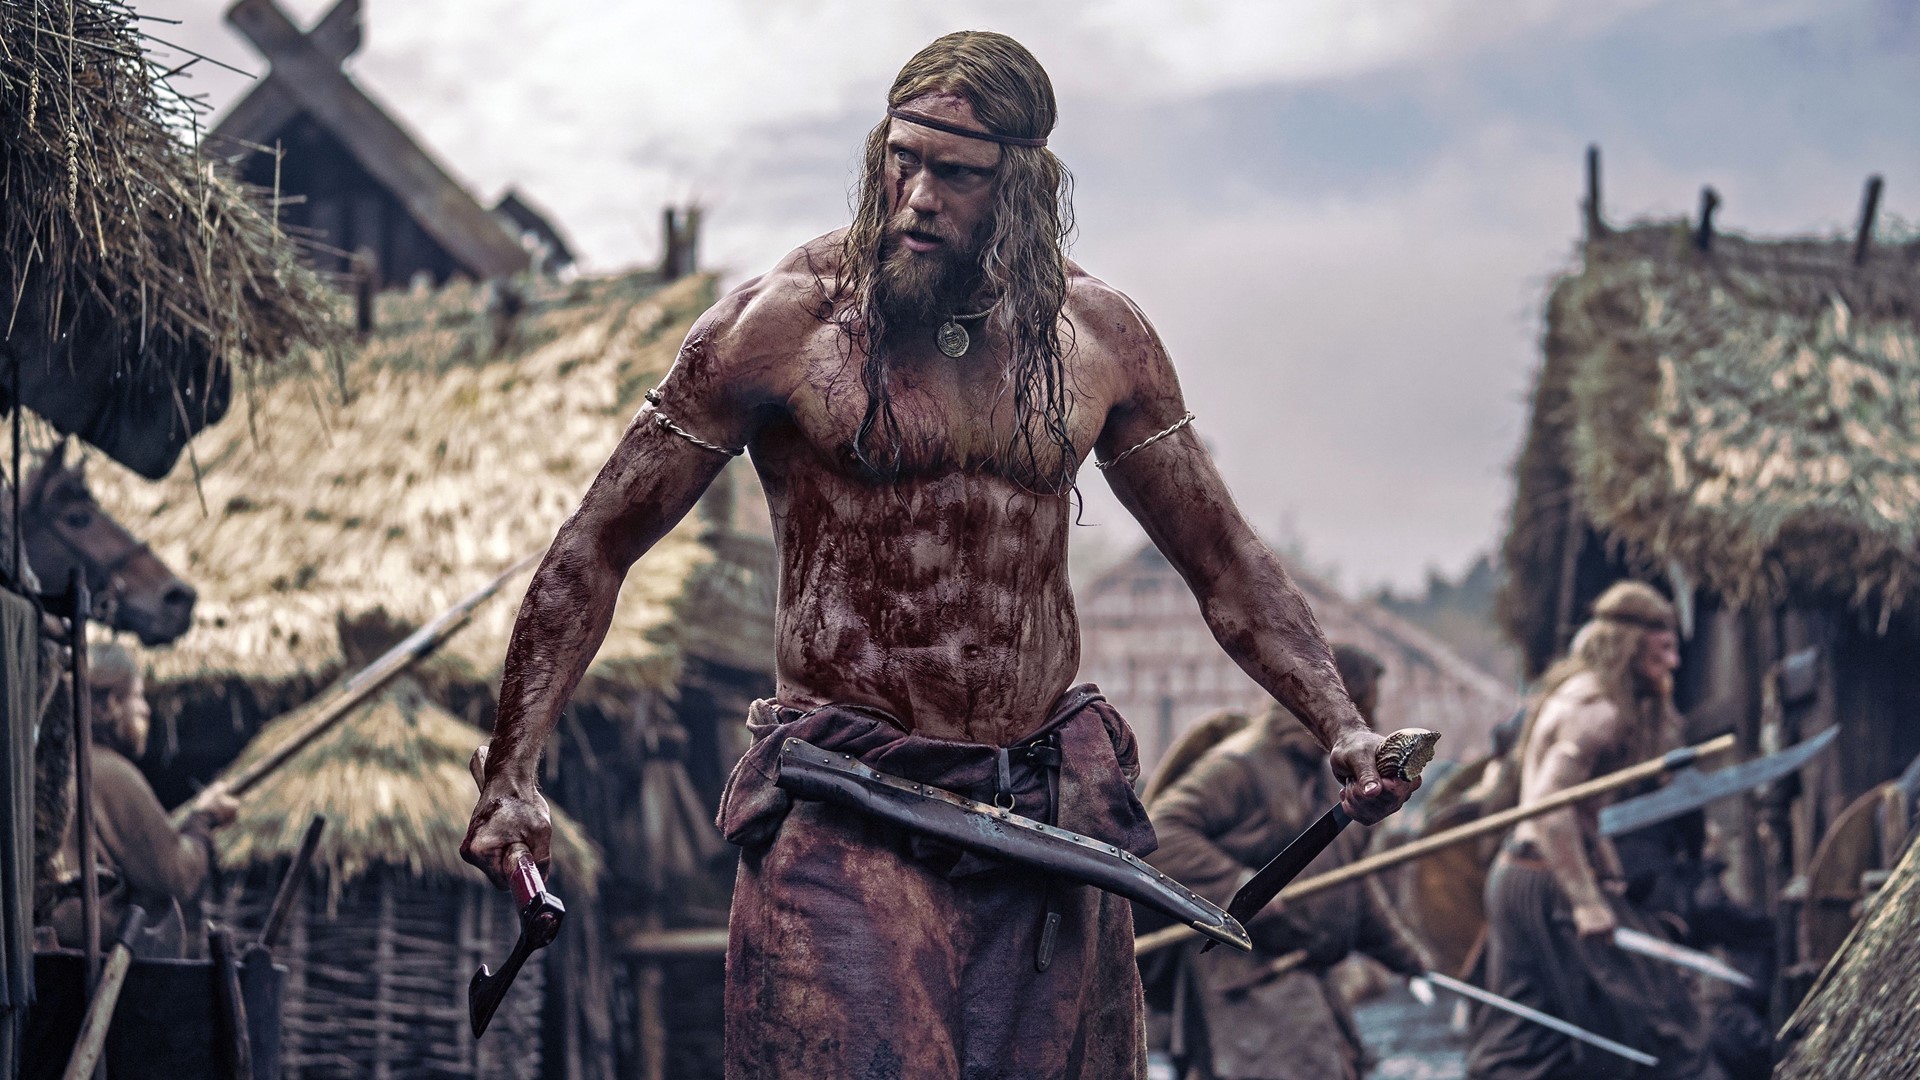 He put on pounds for his new Viking vengeance film. #k5evening